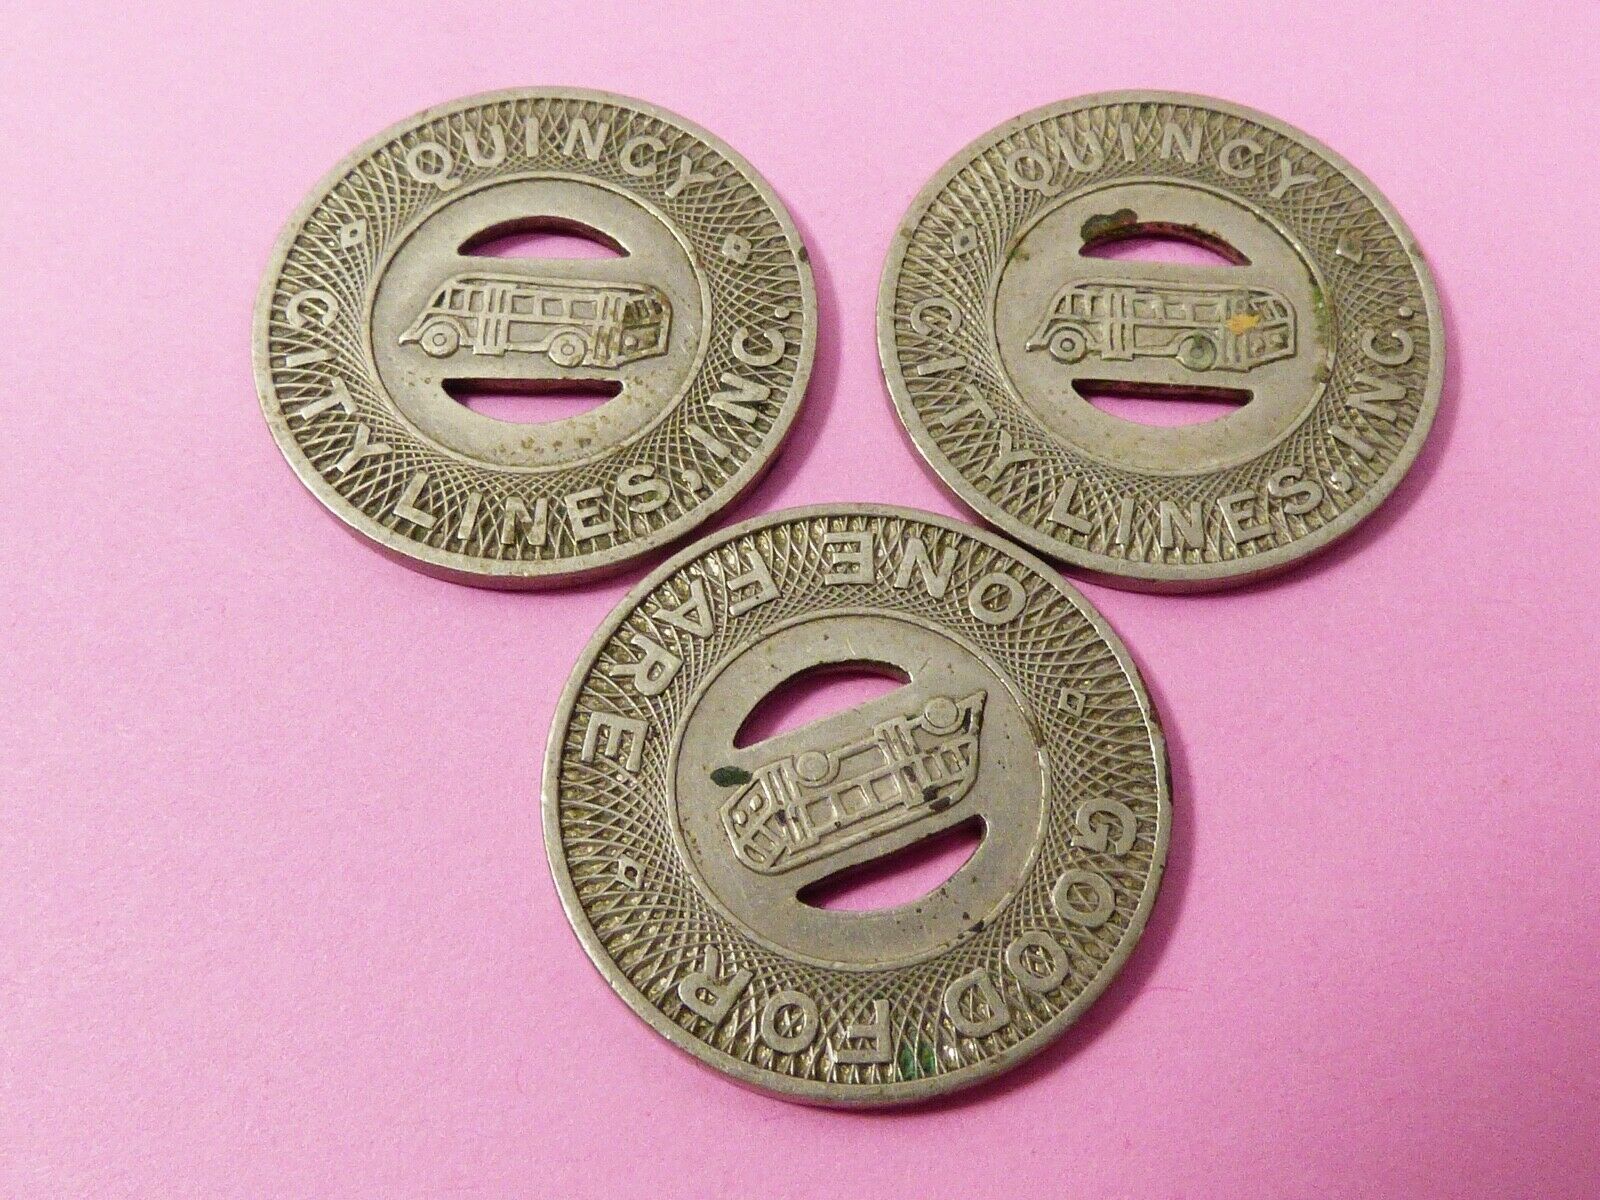 VTG Quincy City Lines Good for one Fare Bus Token lot of 3 - $19.80